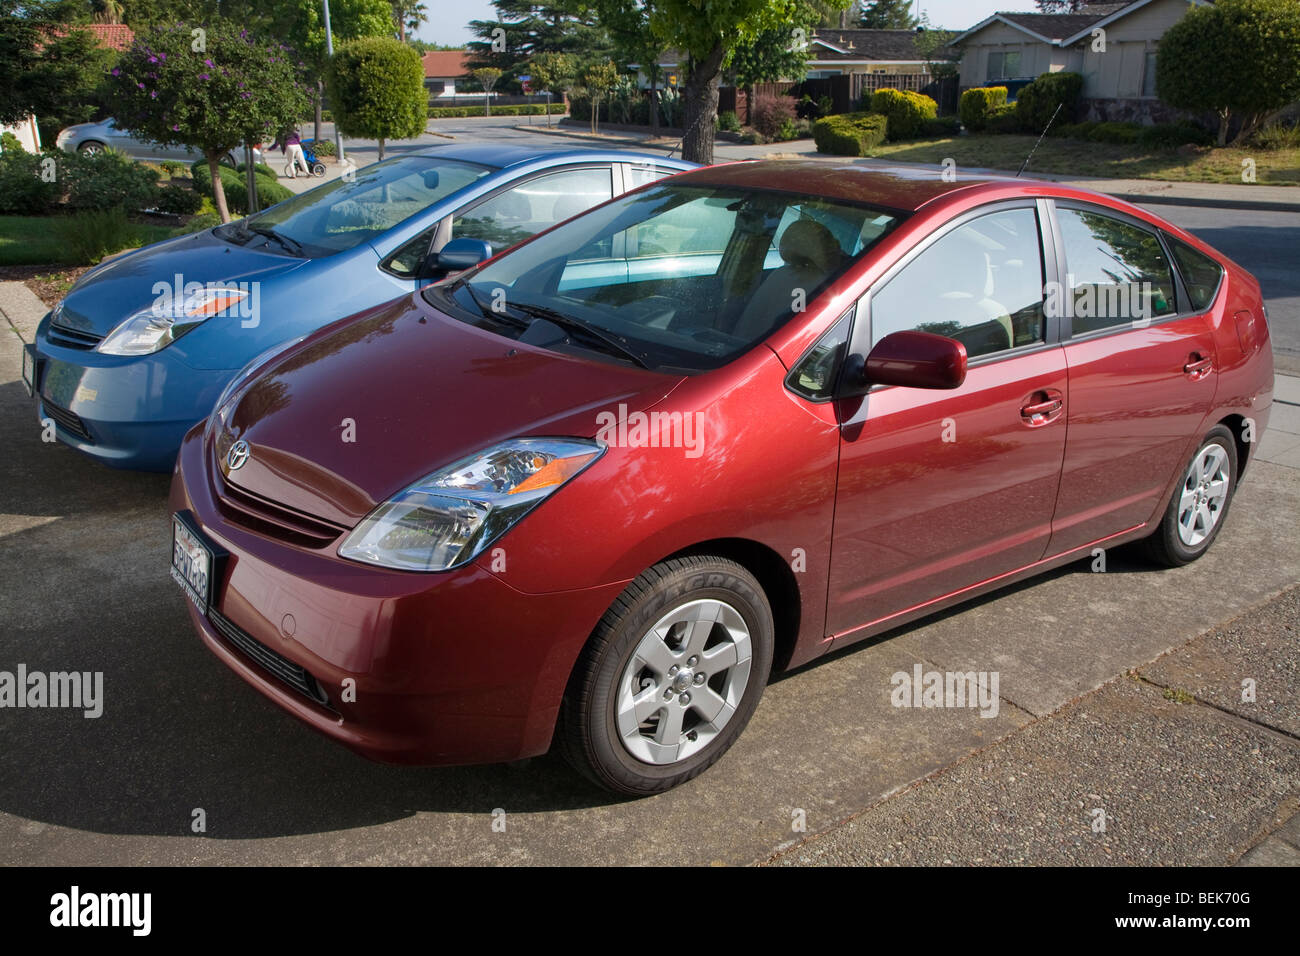 A side view of two parked Toyota Prius hybrid cars. Cupertino, California, USA Stock Photo